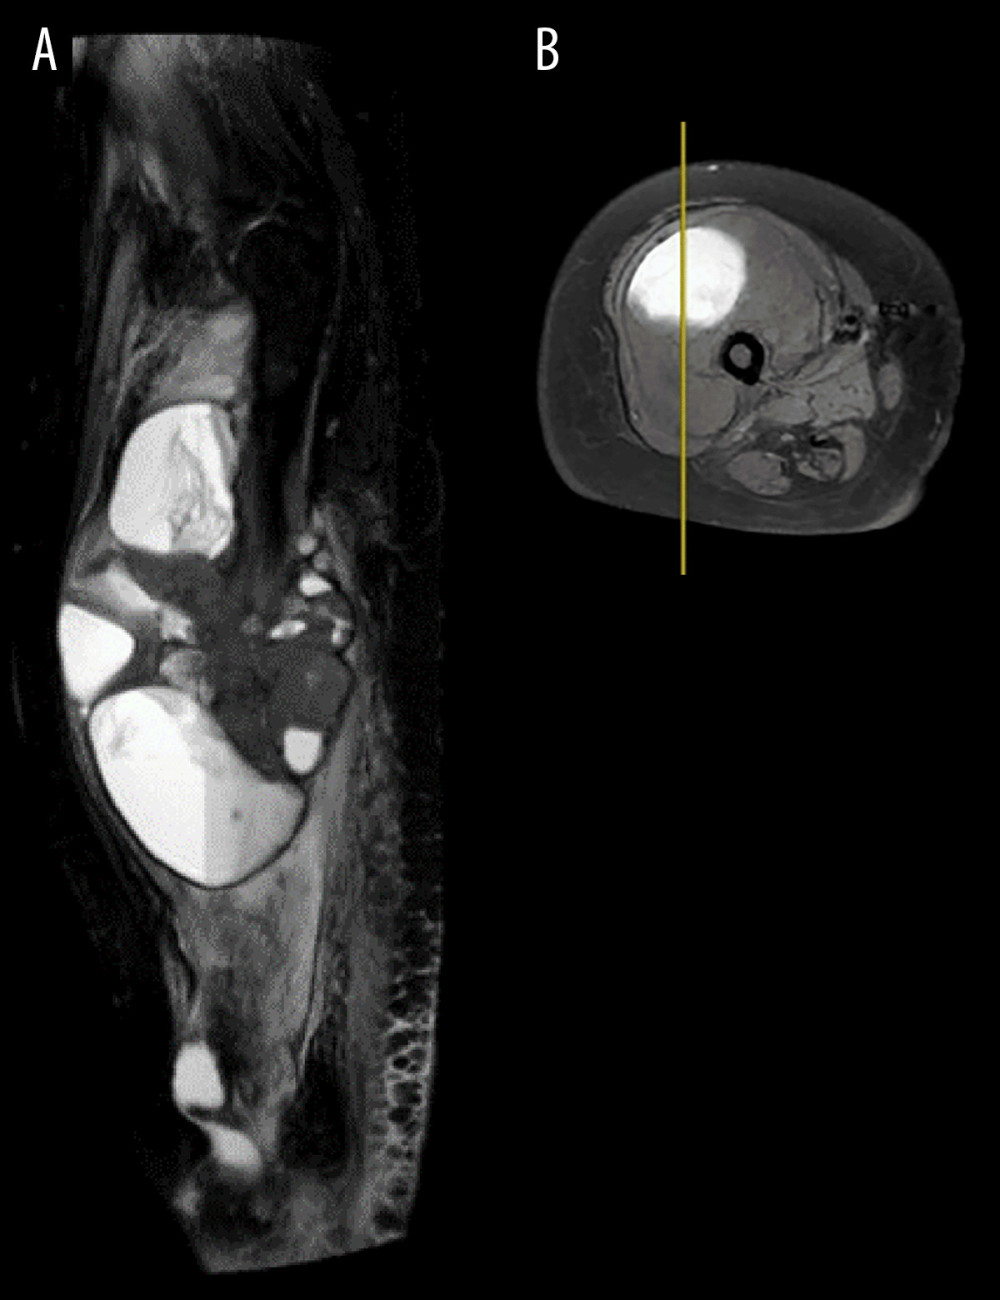 Magnetic resonance imaging (MRI) of the right femur. (A) MRI of the right femur sagittal view shows an inhomogeneous pathologic signal with cystic solid components from vastus medialis, vastus intermedius, and vastus lateralis muscle with the size of 9.41×8.52×16.21 cm. The solid component gave an isohypohyperintense signal at T1 and T2. (B) MRI of the right femur in transverse view.